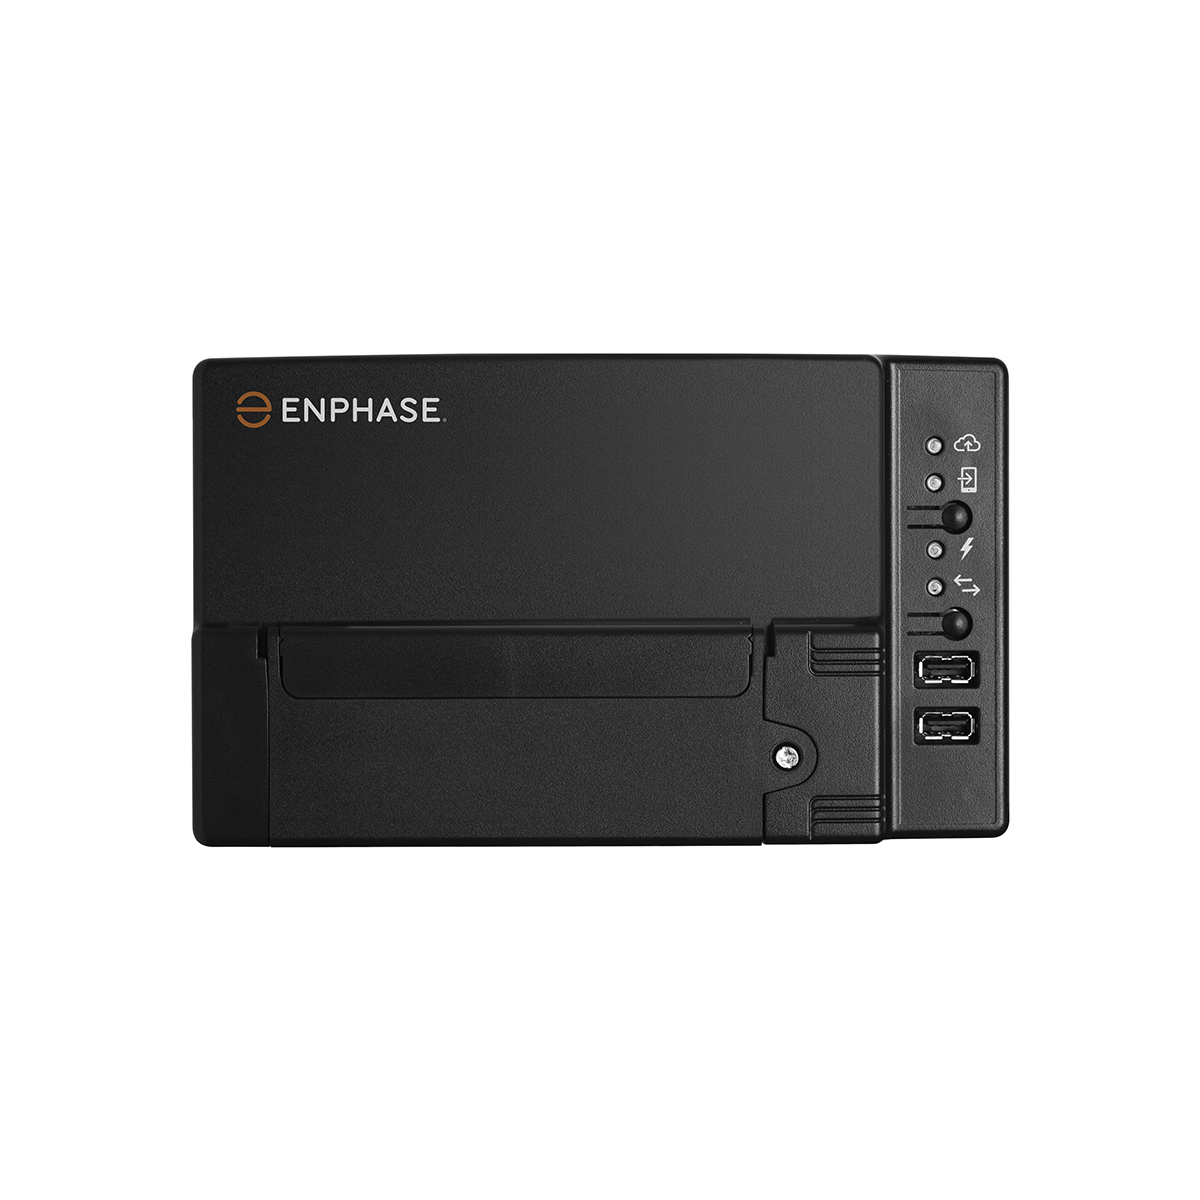 20x Sunpower P6 8100 wp met Enphase IQ8A en Accu 1x N Charge 10T,1 x N Charge 3T